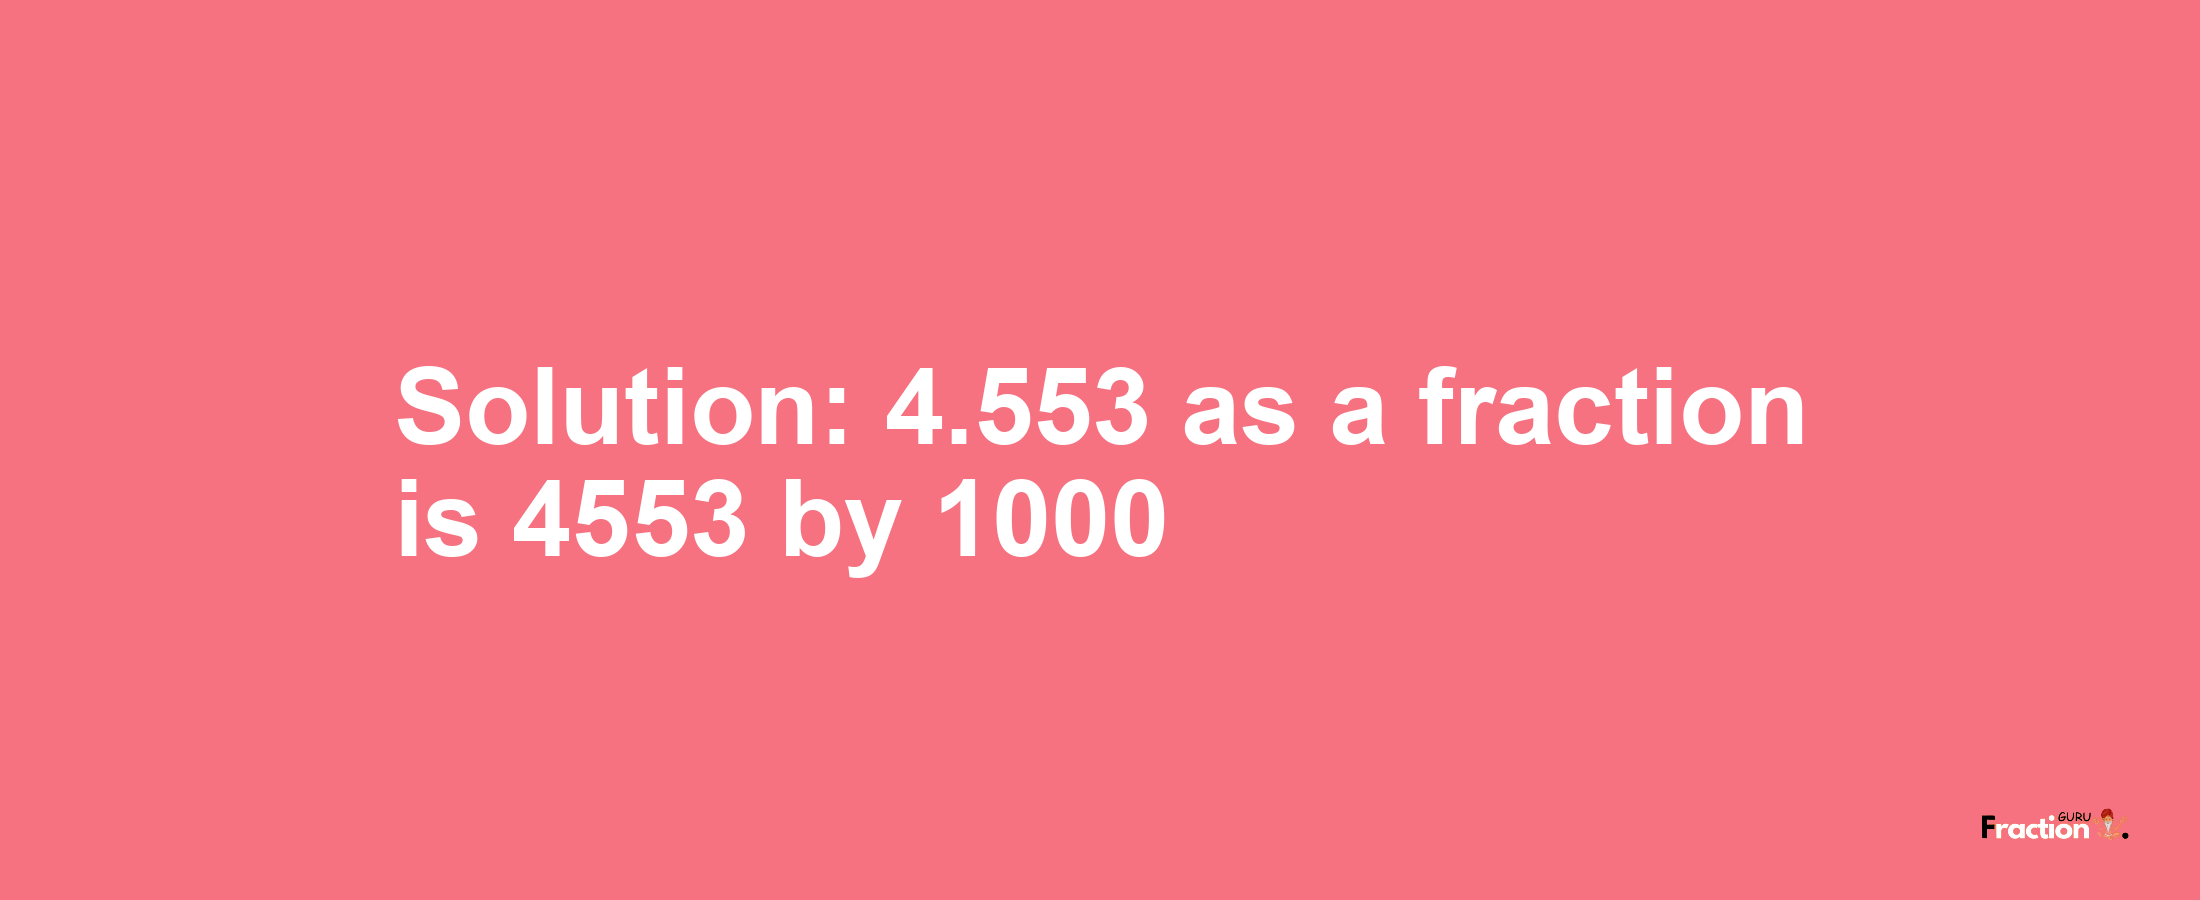 Solution:4.553 as a fraction is 4553/1000